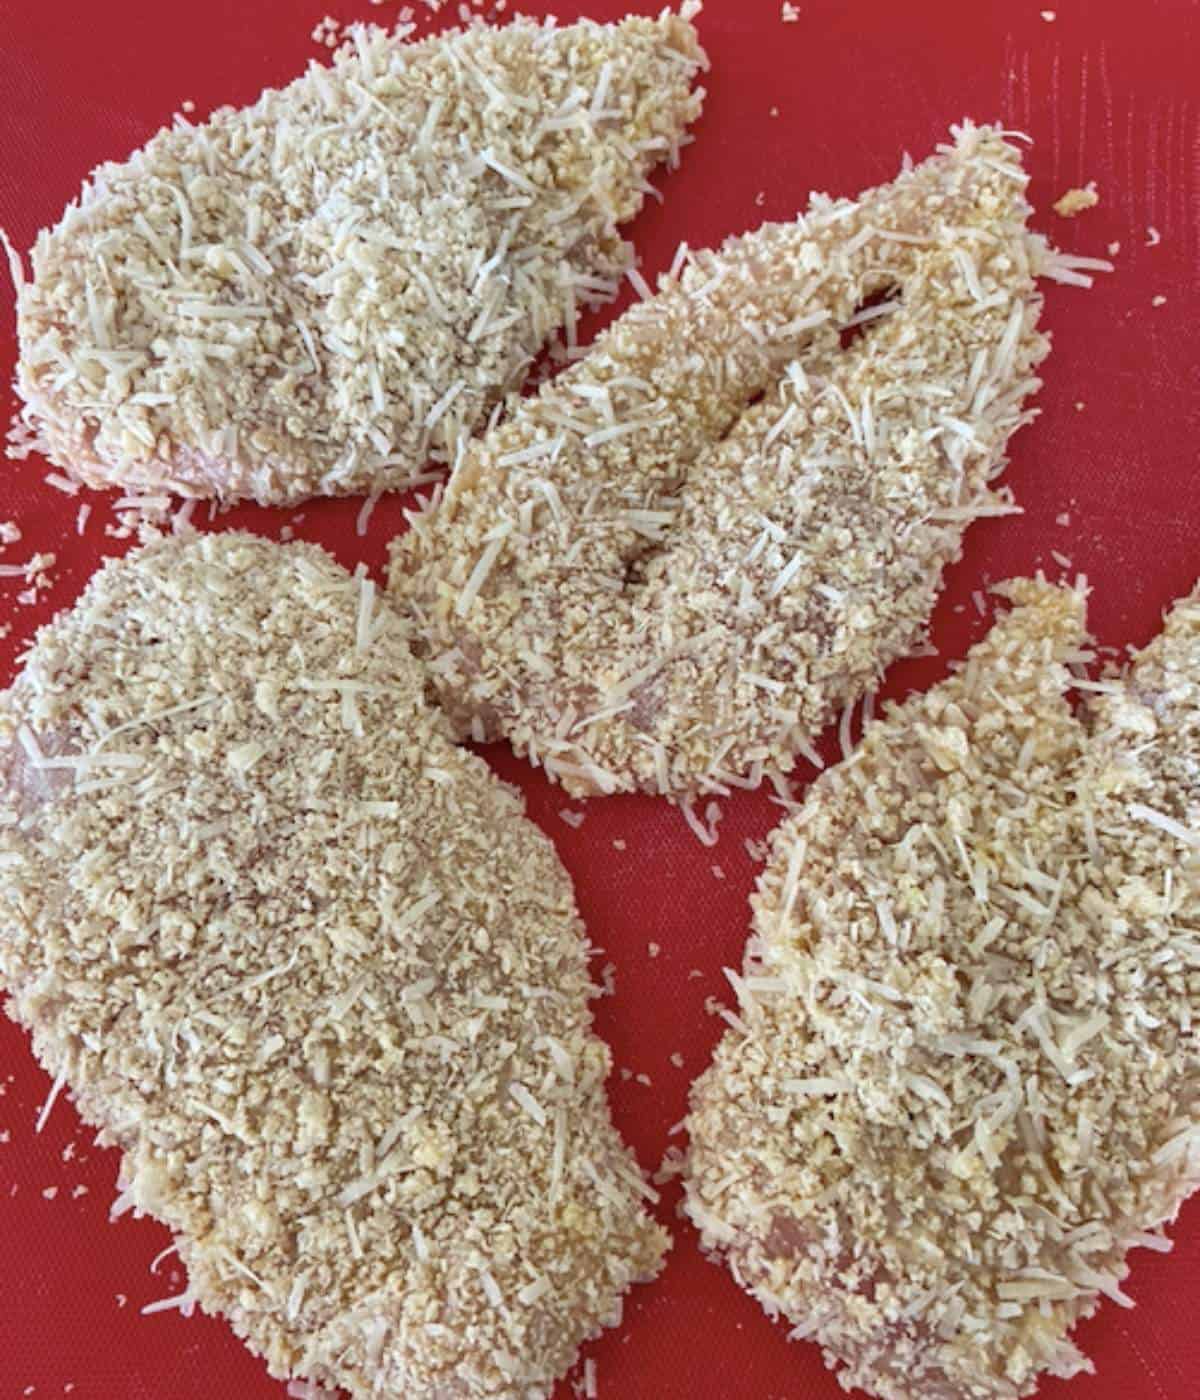 Chicken breasts ready to fry.